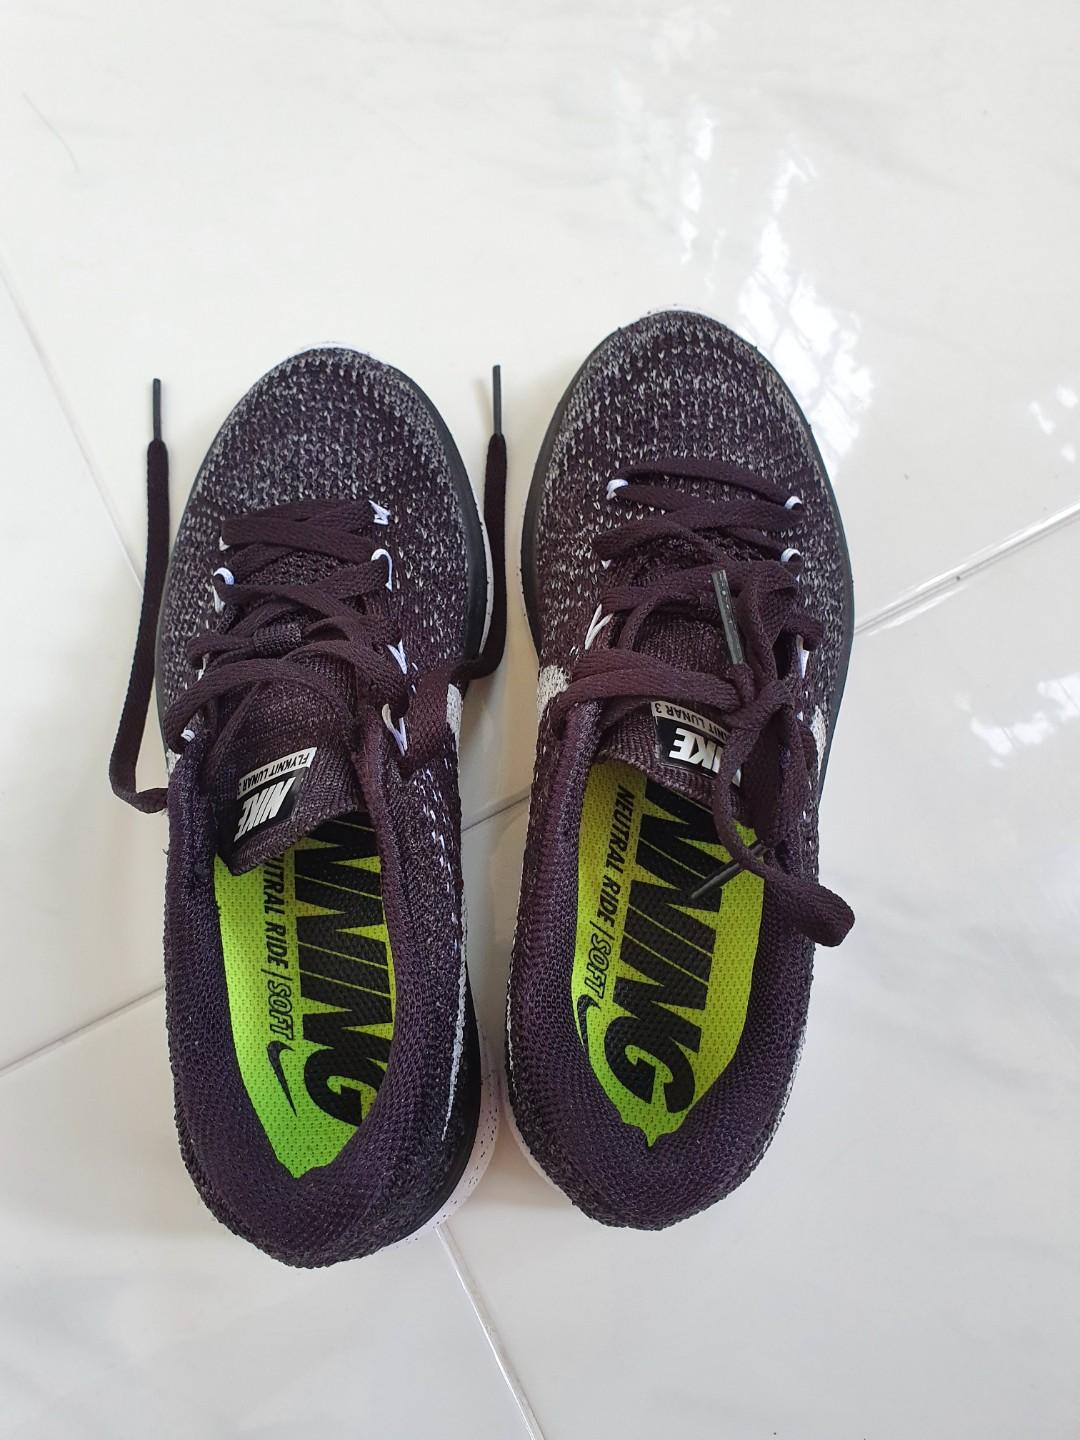 cheapest nike running shoes